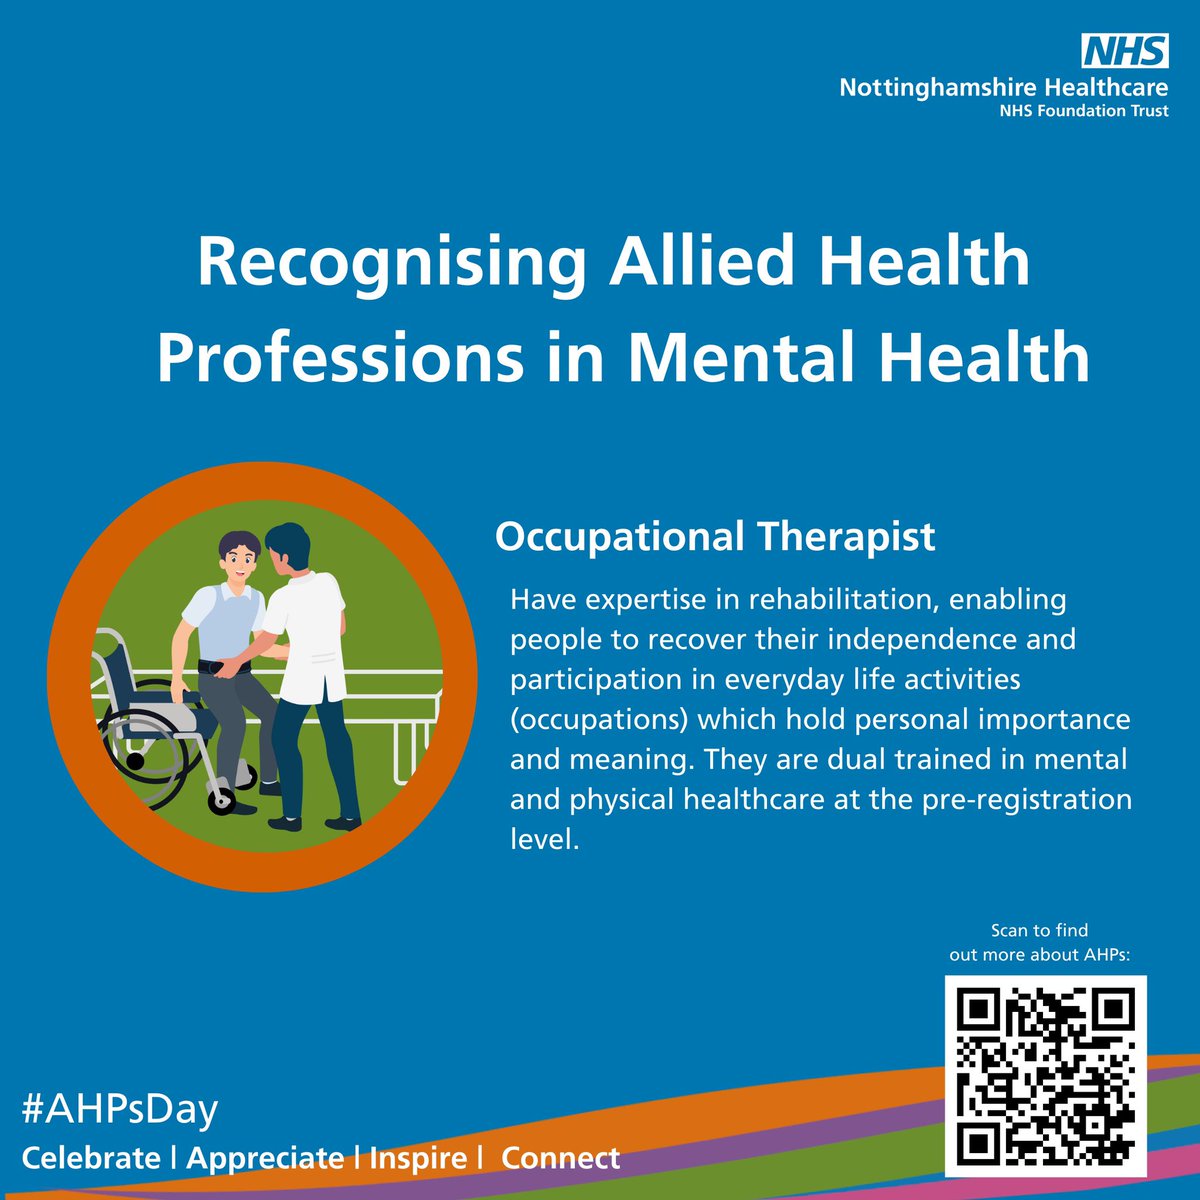 Occupational Therapists seek out what holds meaning for people - making them imperative within many services, but especially within mental health #AHPsDay #AHPsInMH